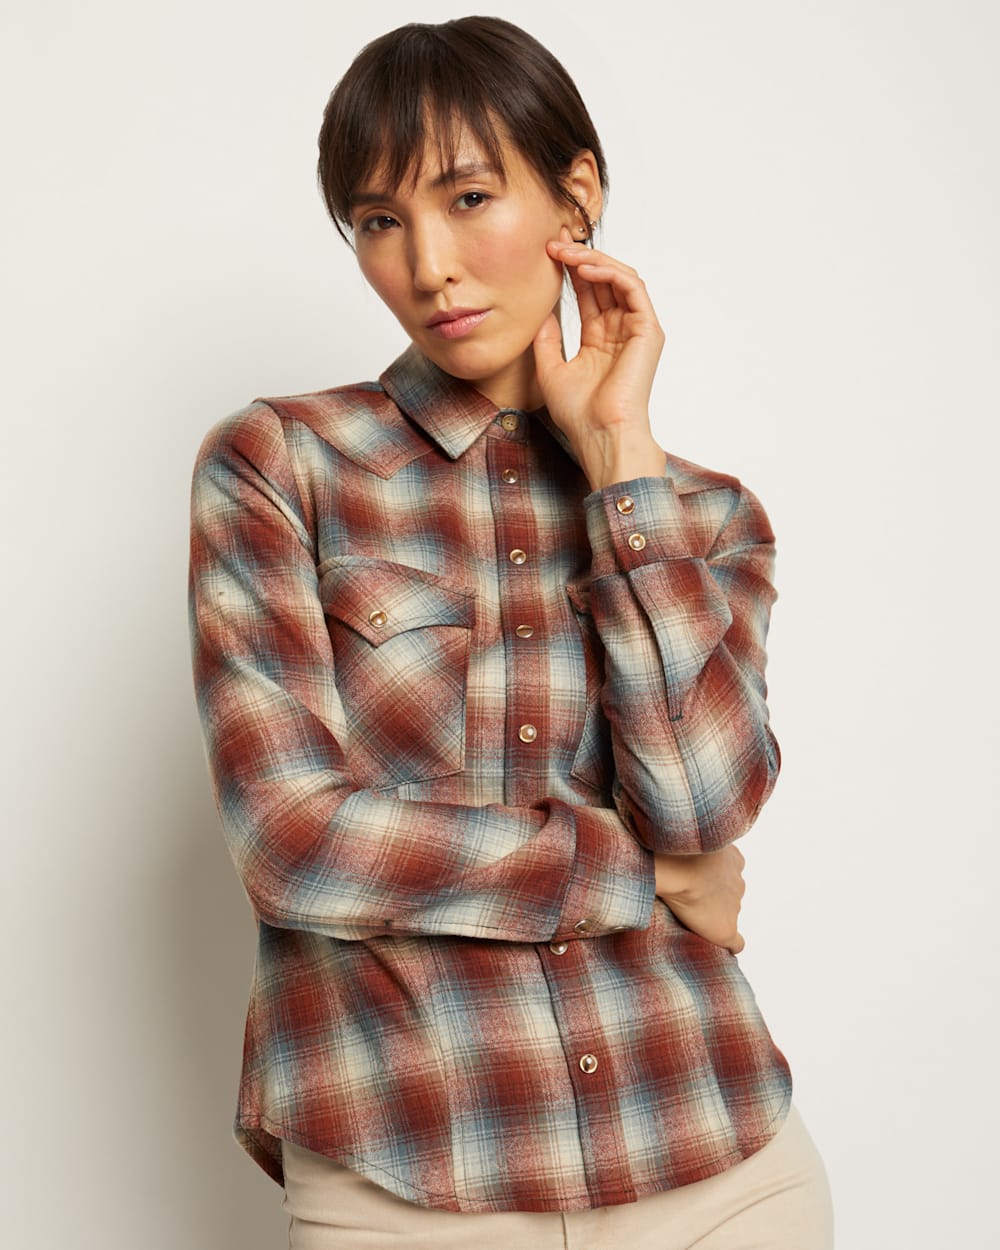 WOMEN'S SNAP-FRONT CANYON SHIRT IN RUST/BLUE PLAID image number 1